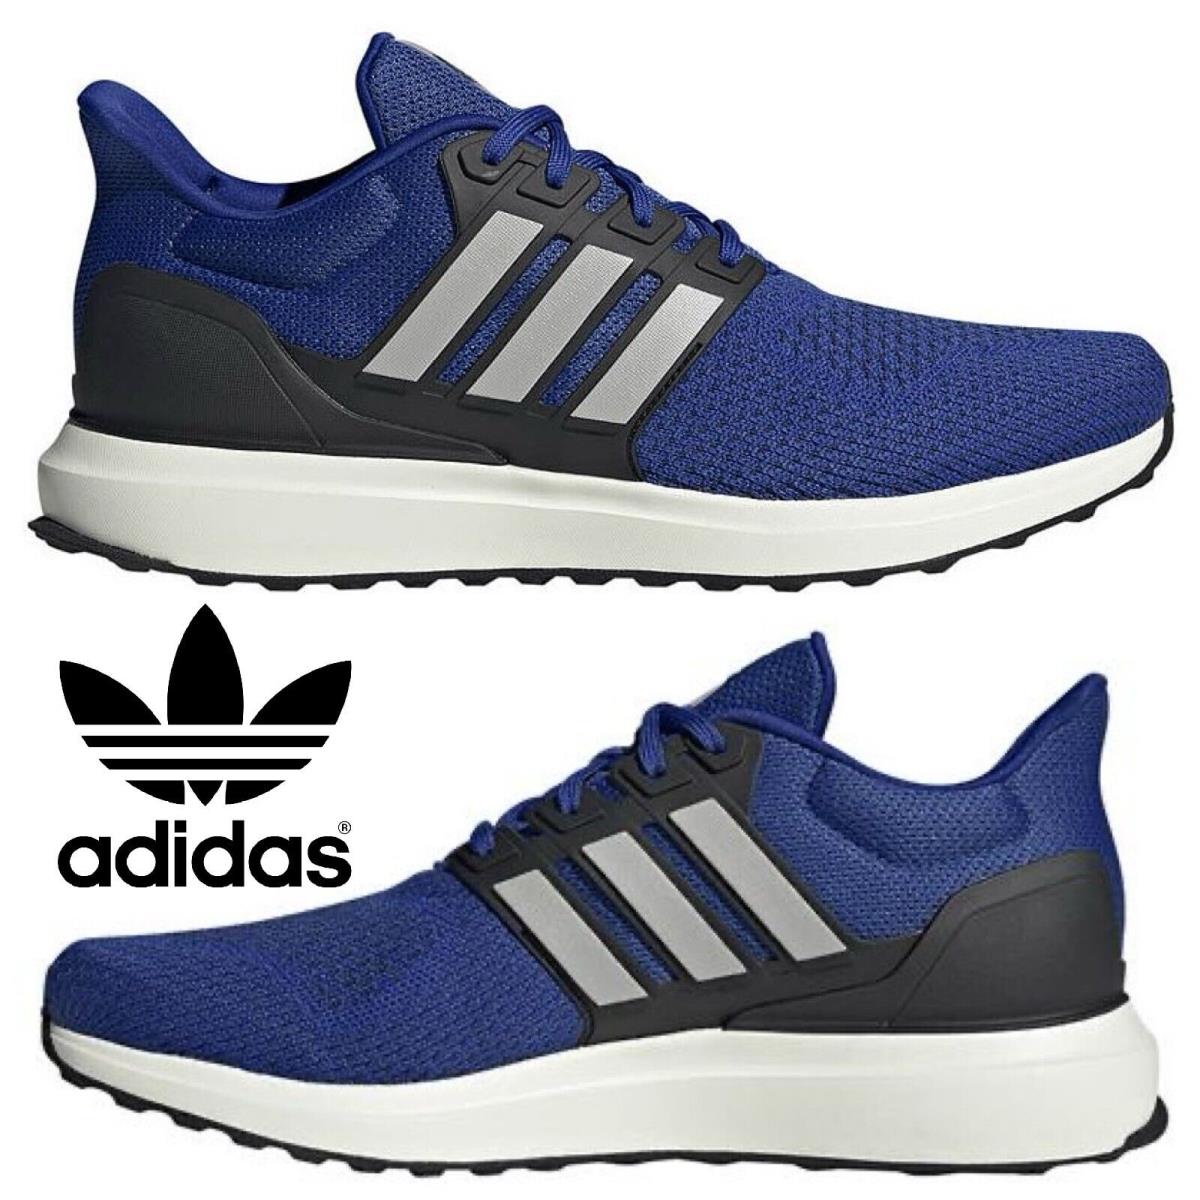 Adidas Ubounce Dna Men`s Sneakers Comfort Sport Casual Running Shoes Blue Black